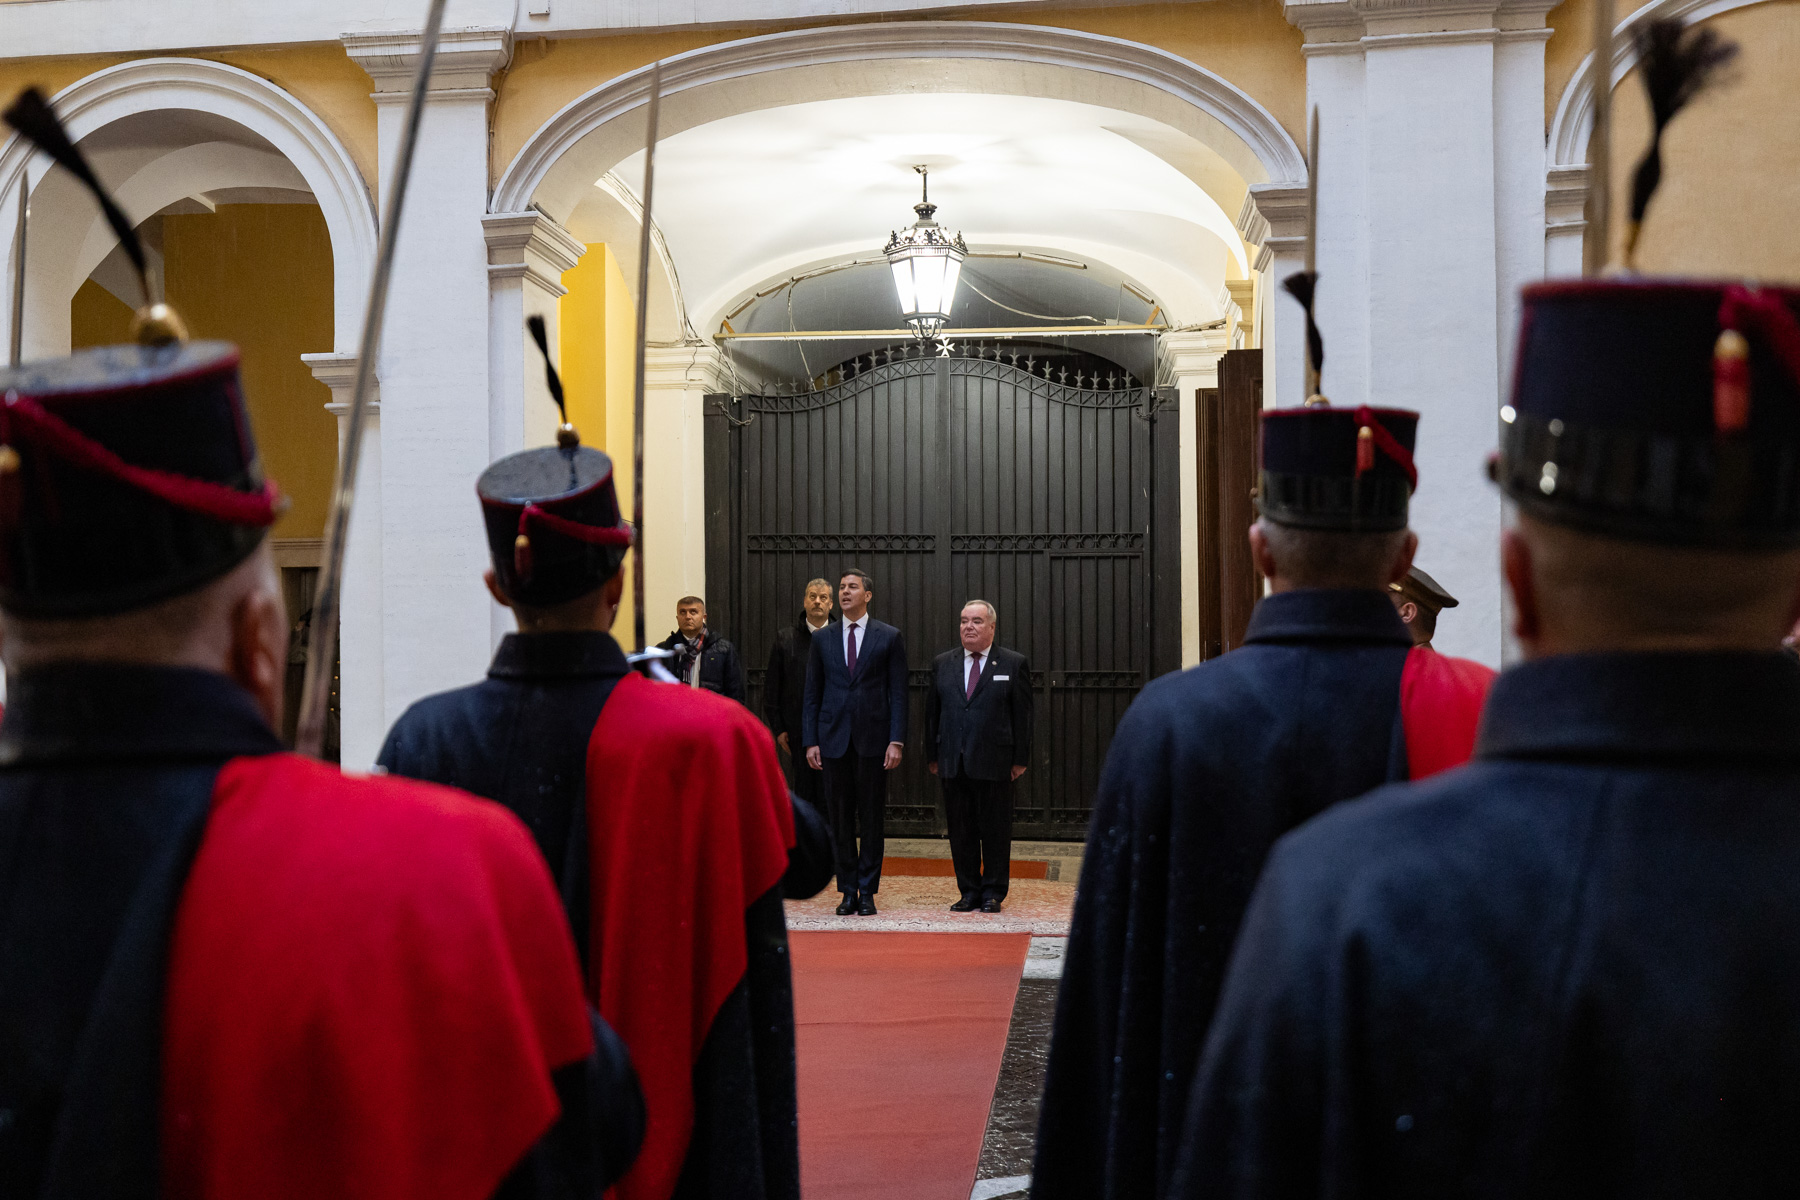 Grand Master of Sovereign Order of Malta receives President of Paraguay on official visit